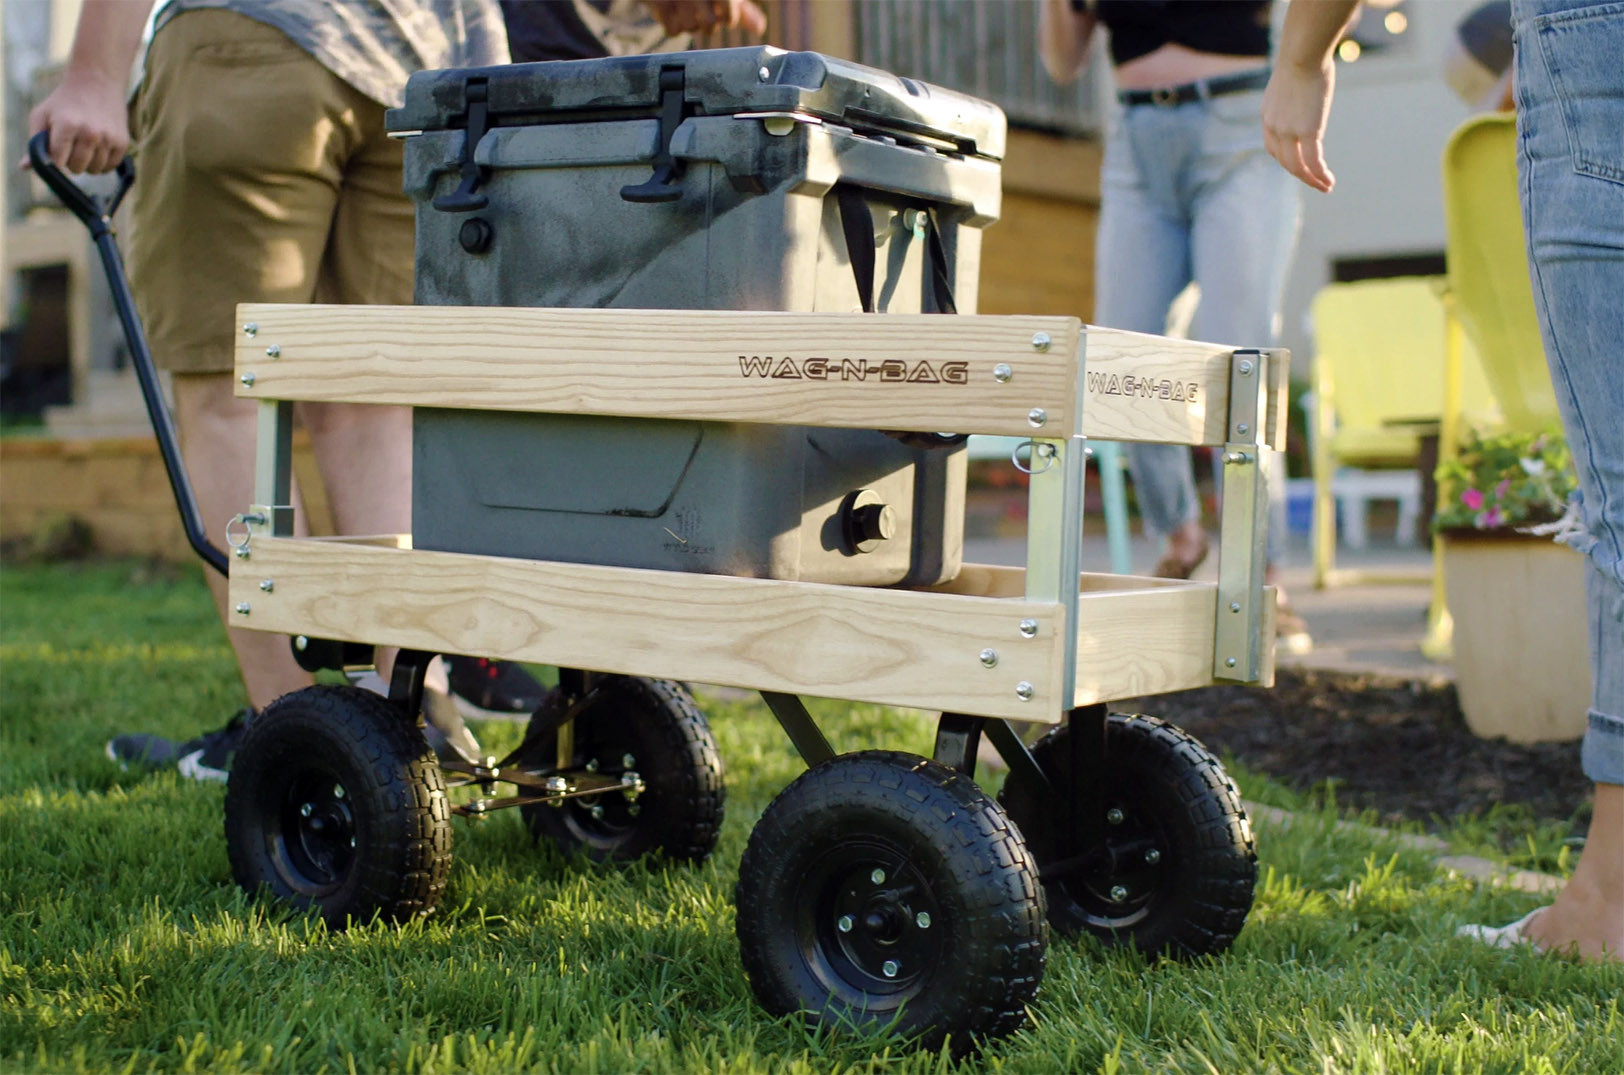 Demand for Wag-N-Bag rolls back, co-founders say; portable game wagon just needs a second push